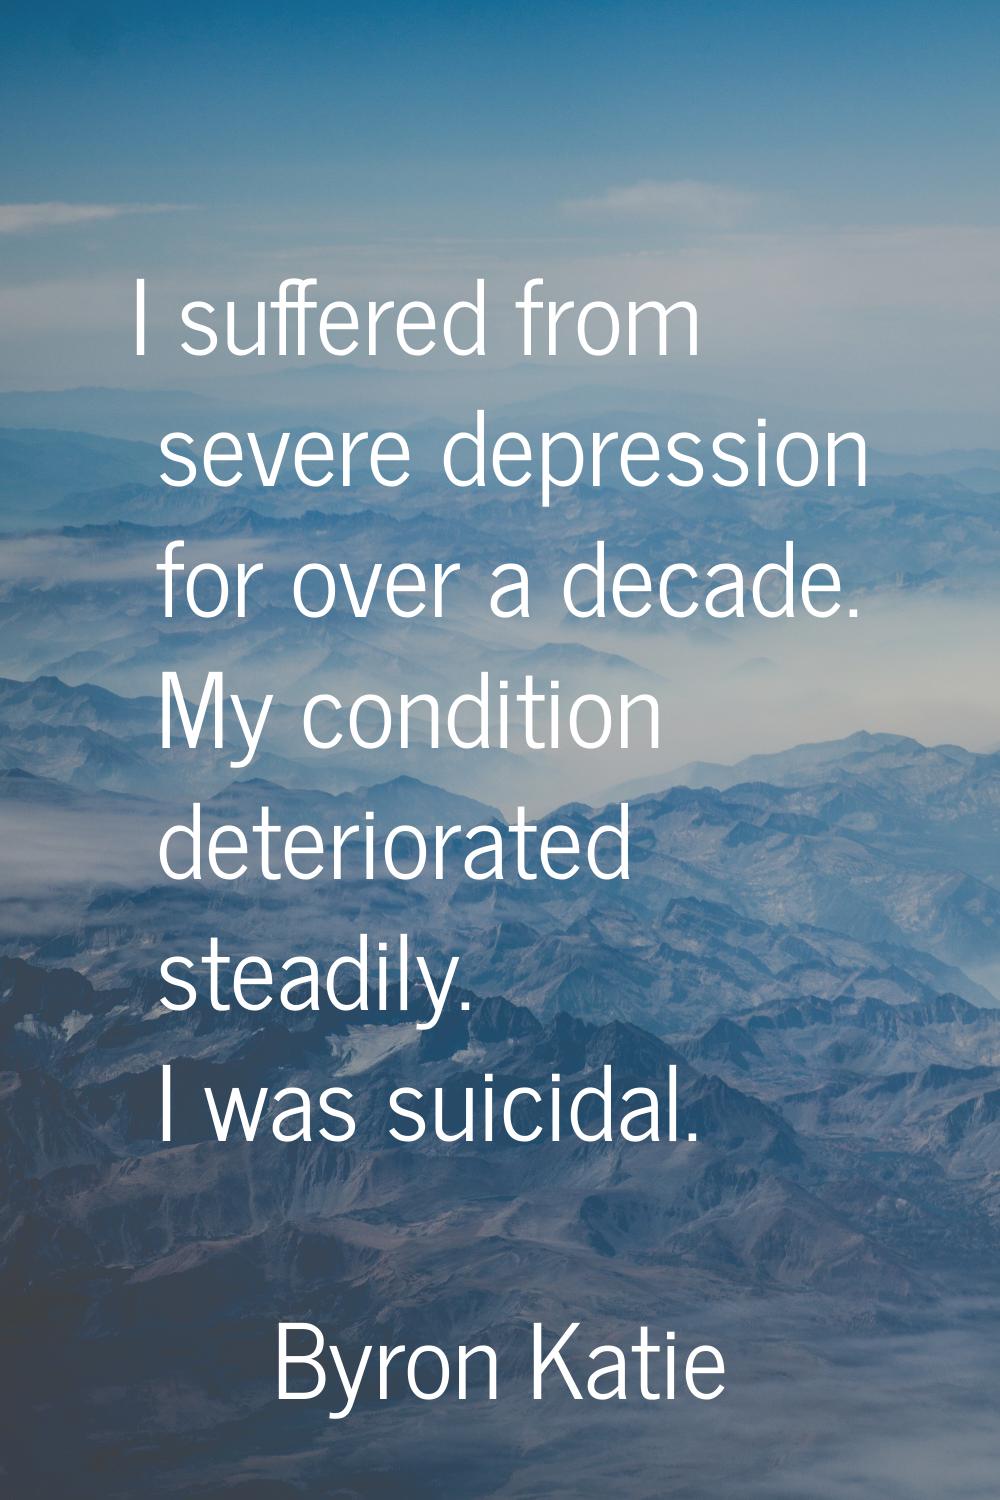 I suffered from severe depression for over a decade. My condition deteriorated steadily. I was suic